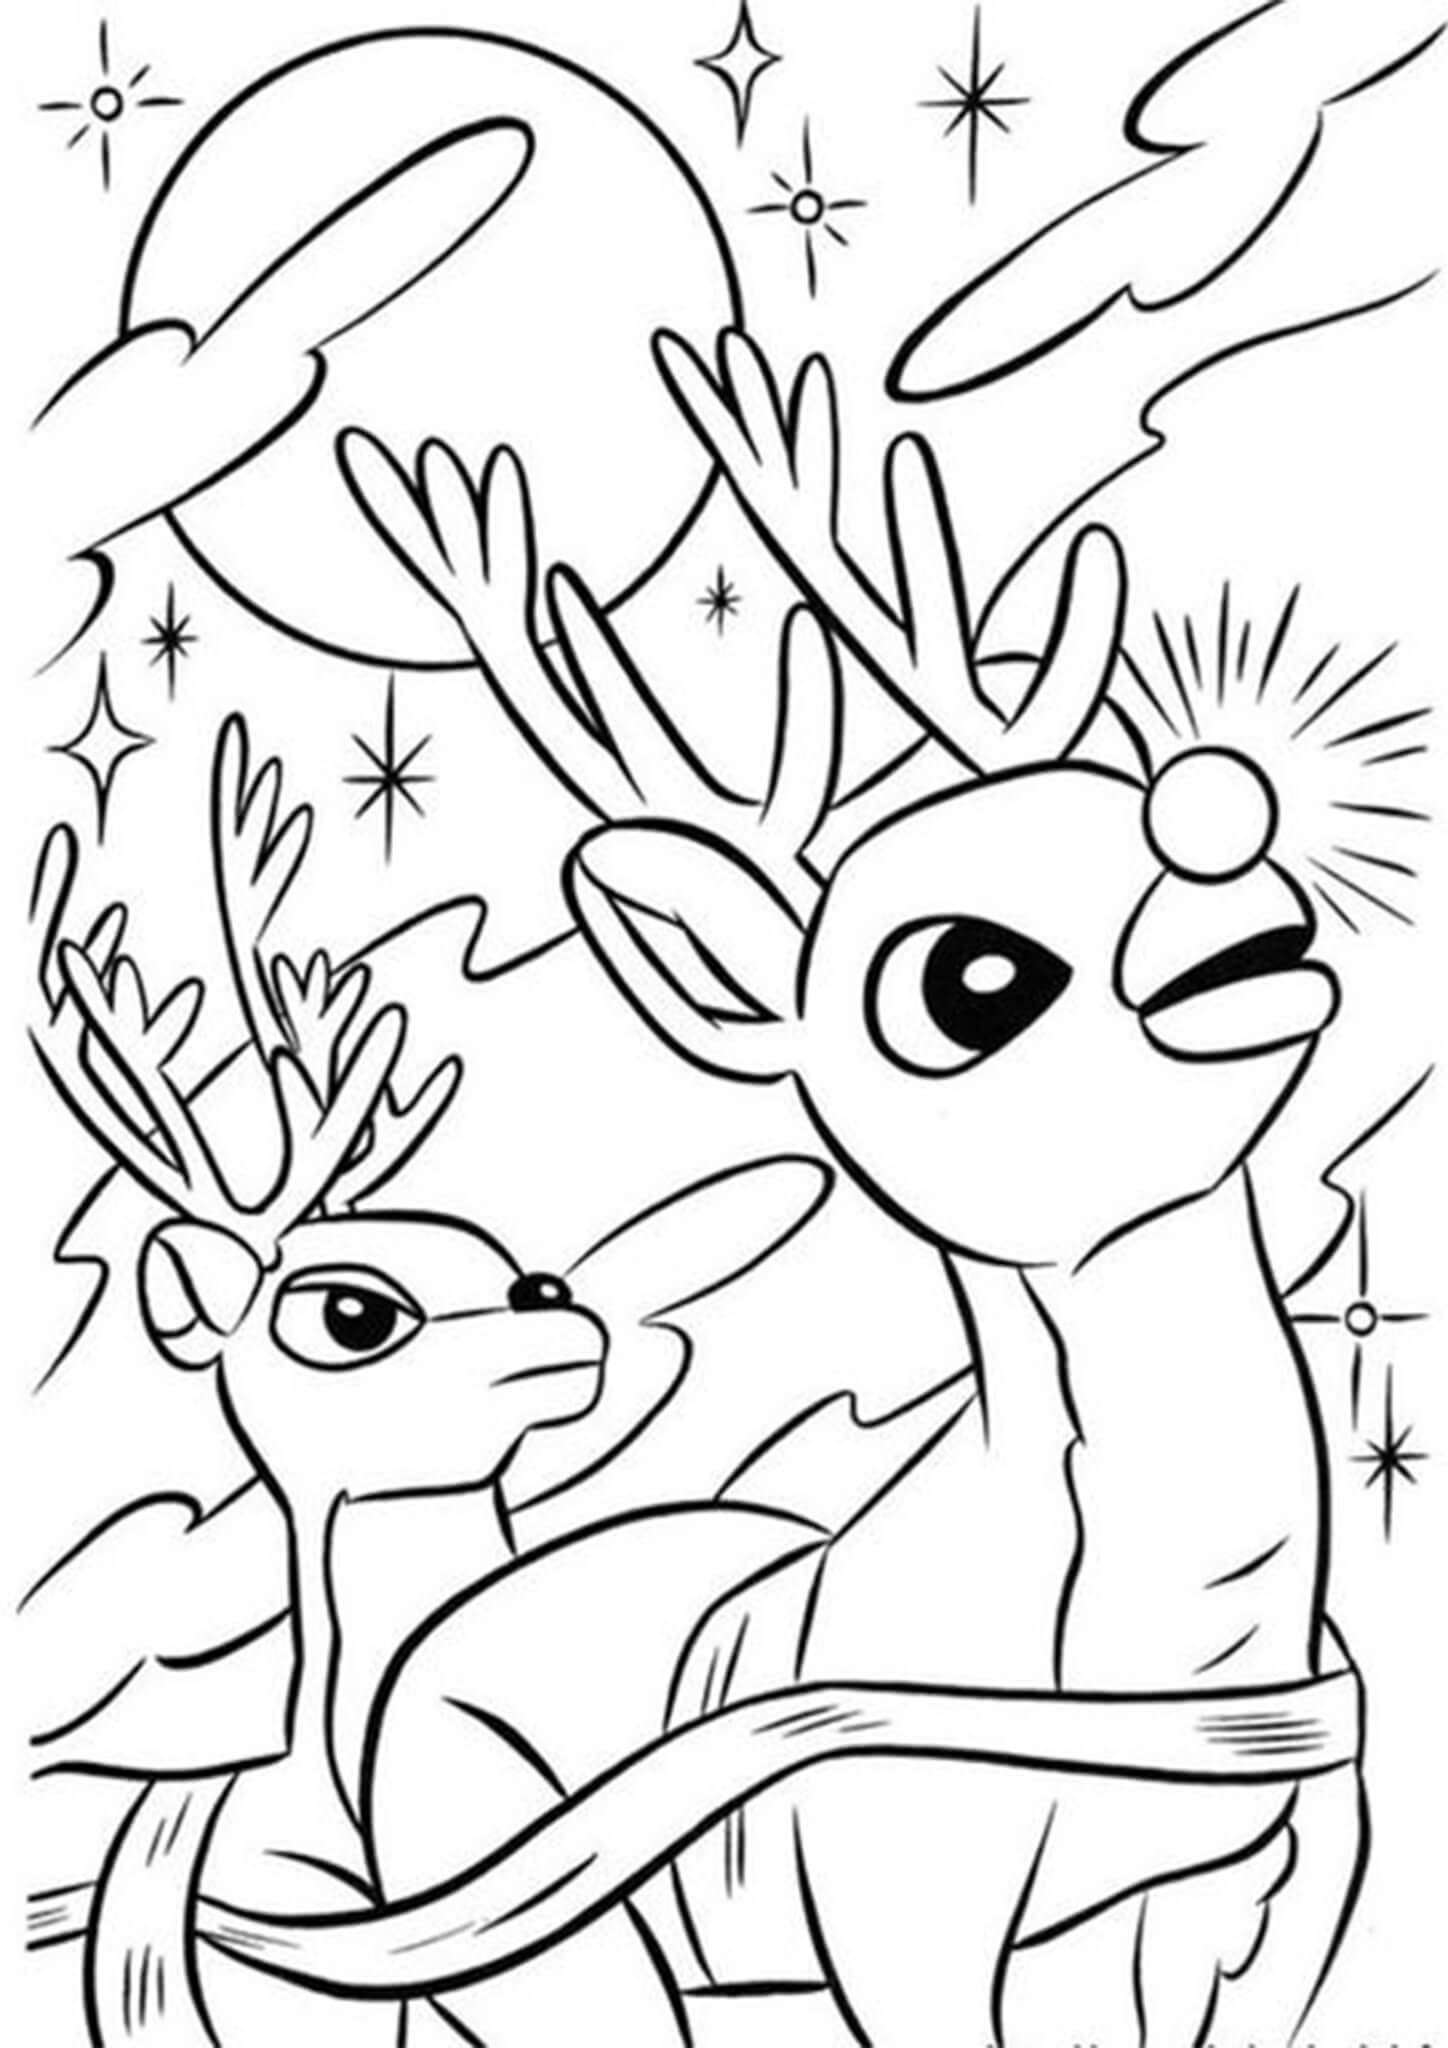 Rudolph The Red Nosed Reindeer Coloring Pages   Tulamama